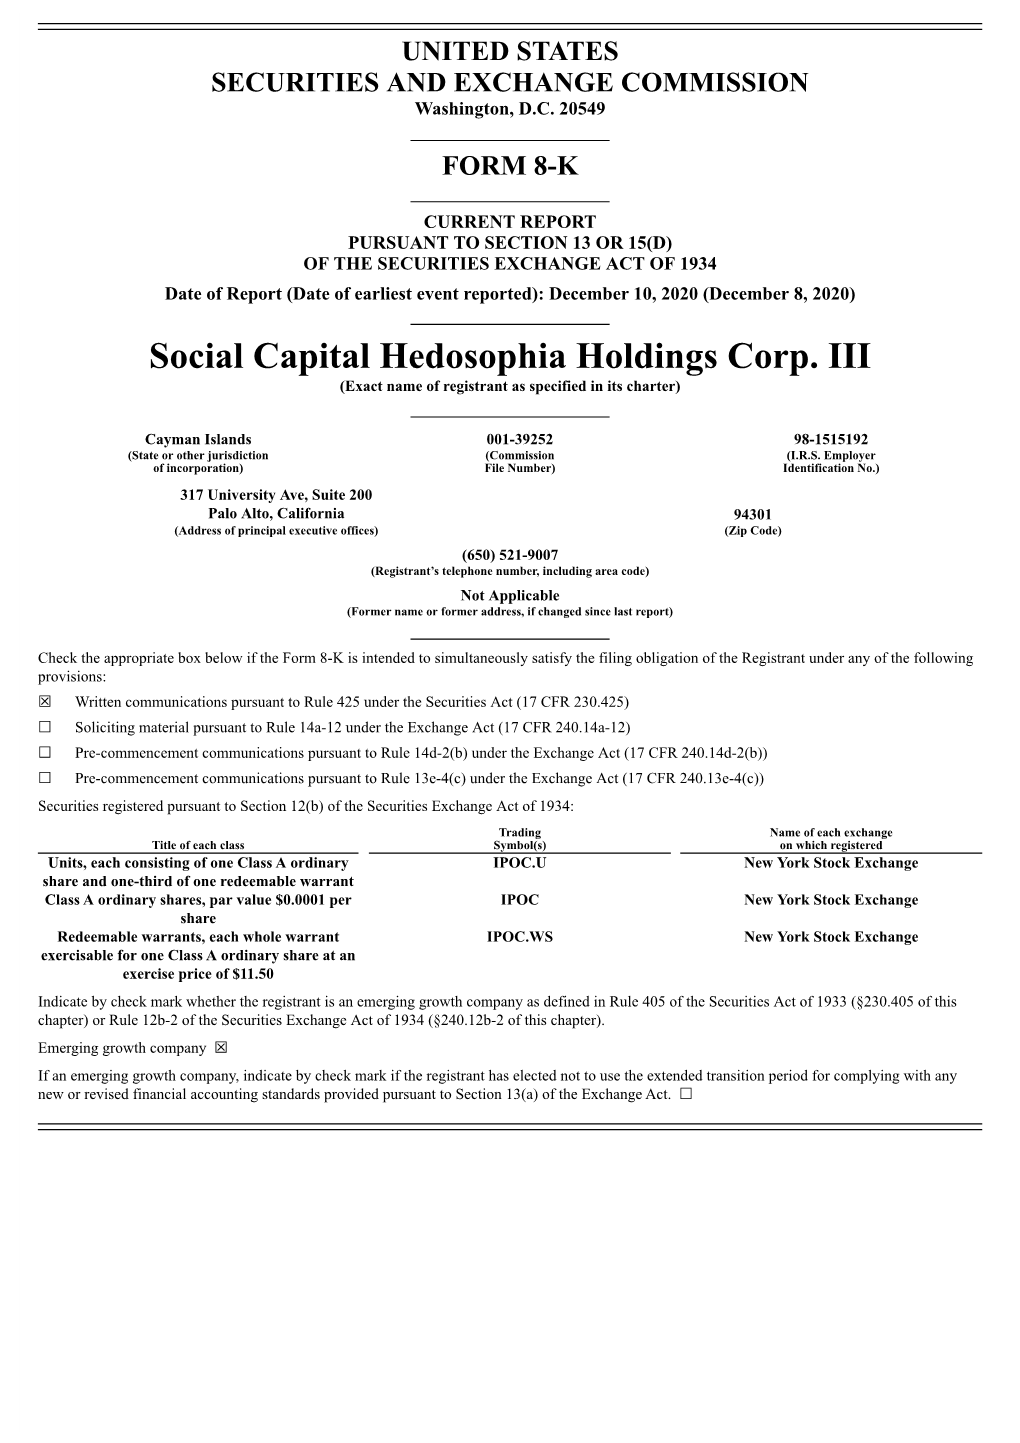 Social Capital Hedosophia Holdings Corp. III (Exact Name of Registrant As Specified in Its Charter)